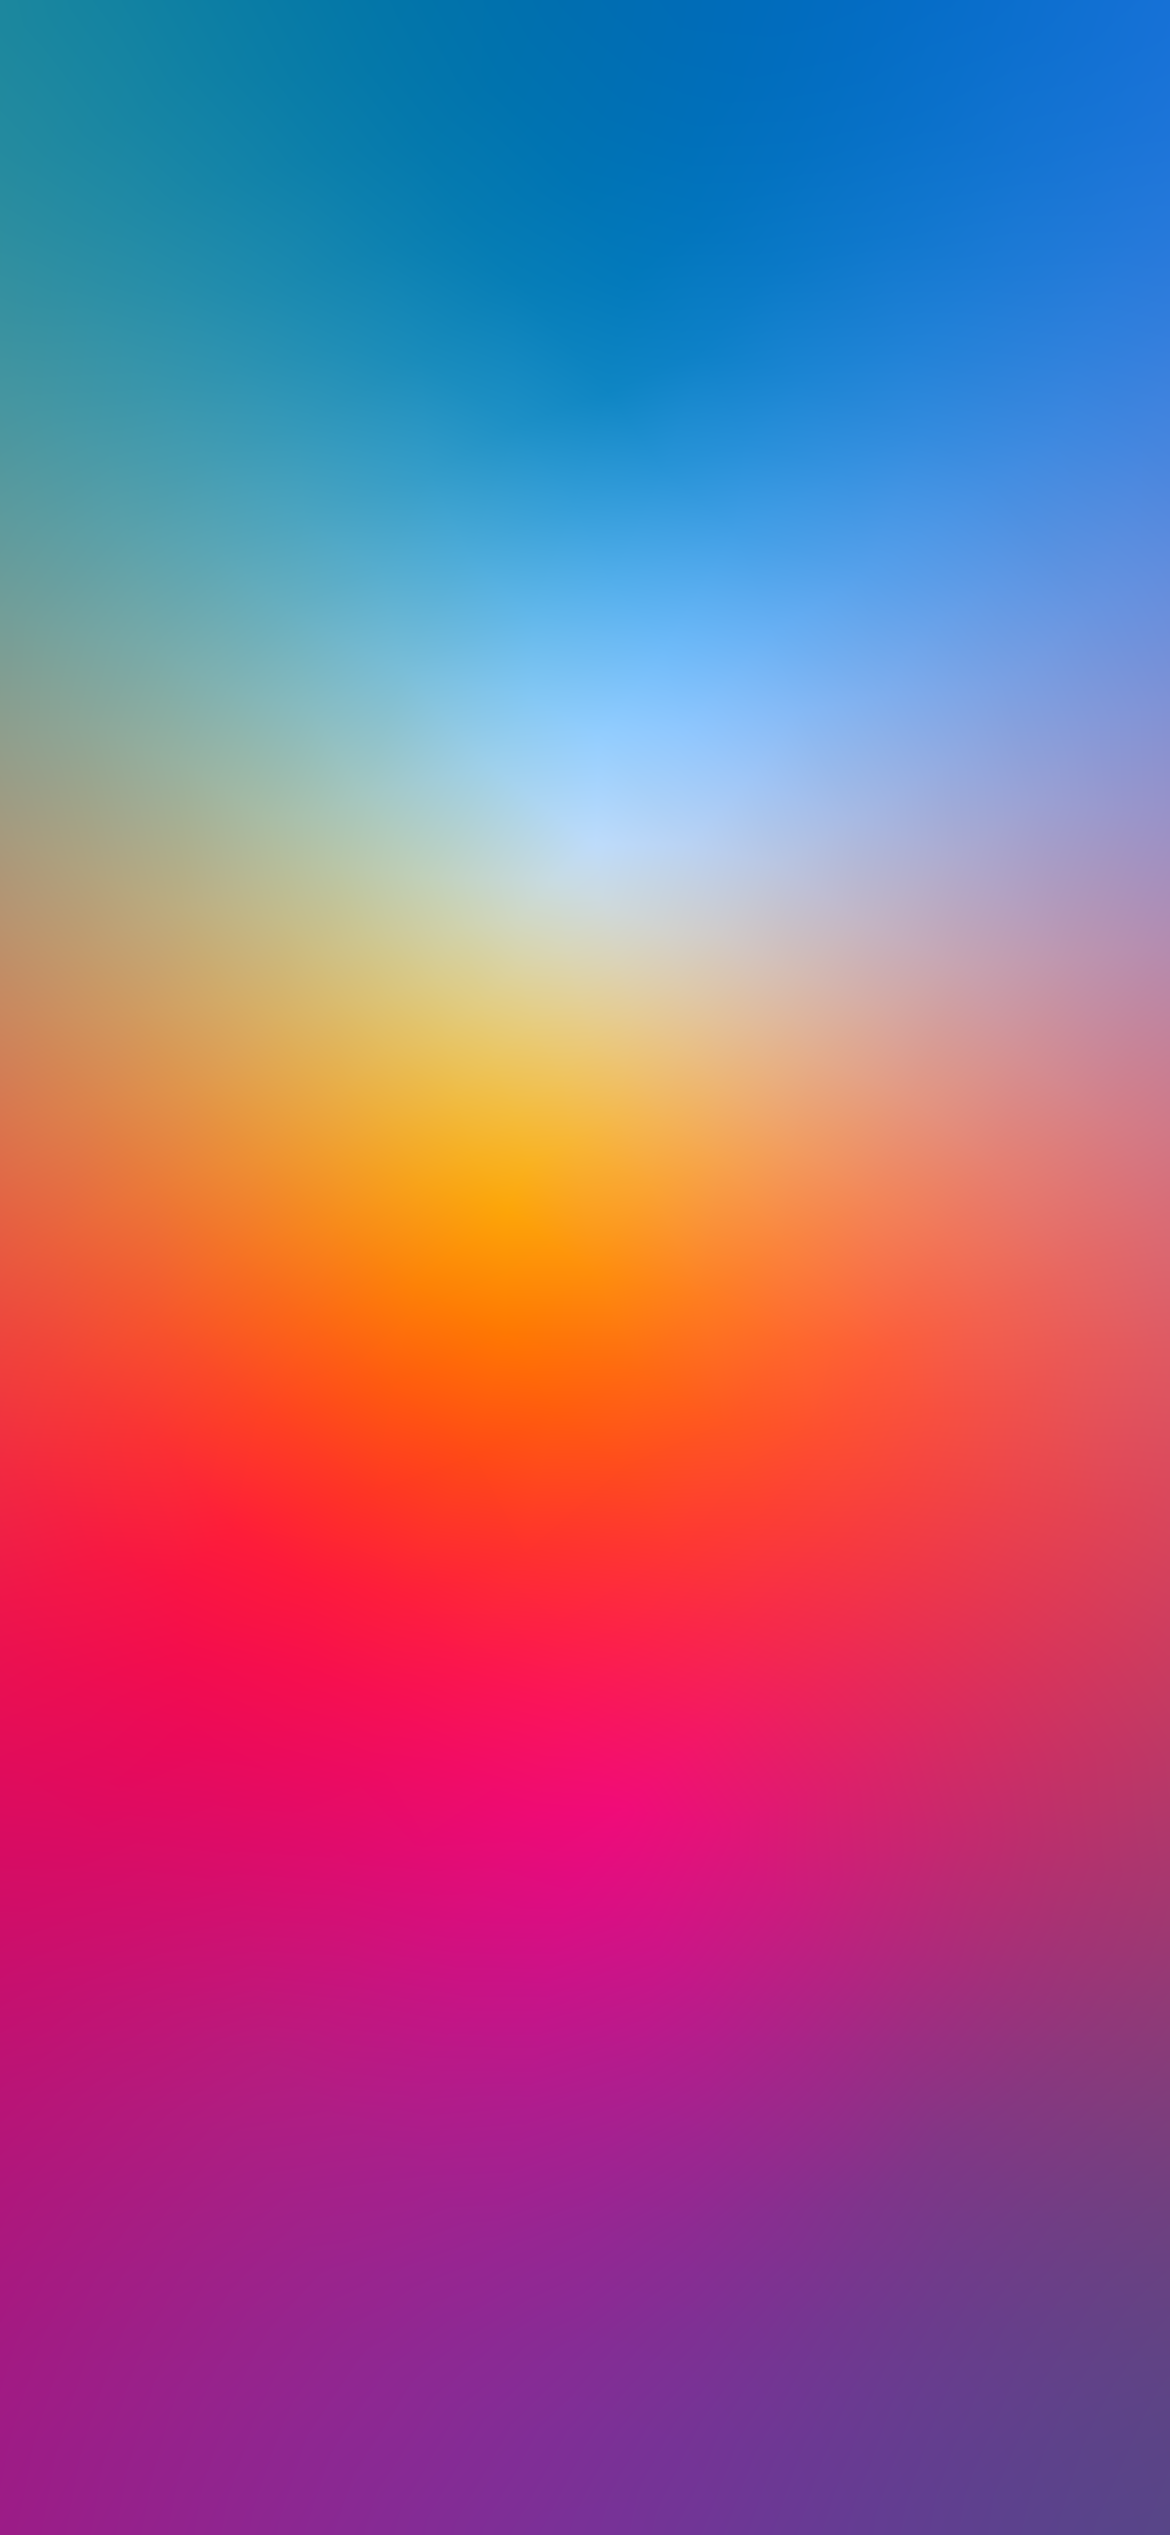 Iphone Wallpaper Plain Images | Free Photos, PNG Stickers, Wallpapers &  Backgrounds - rawpixel